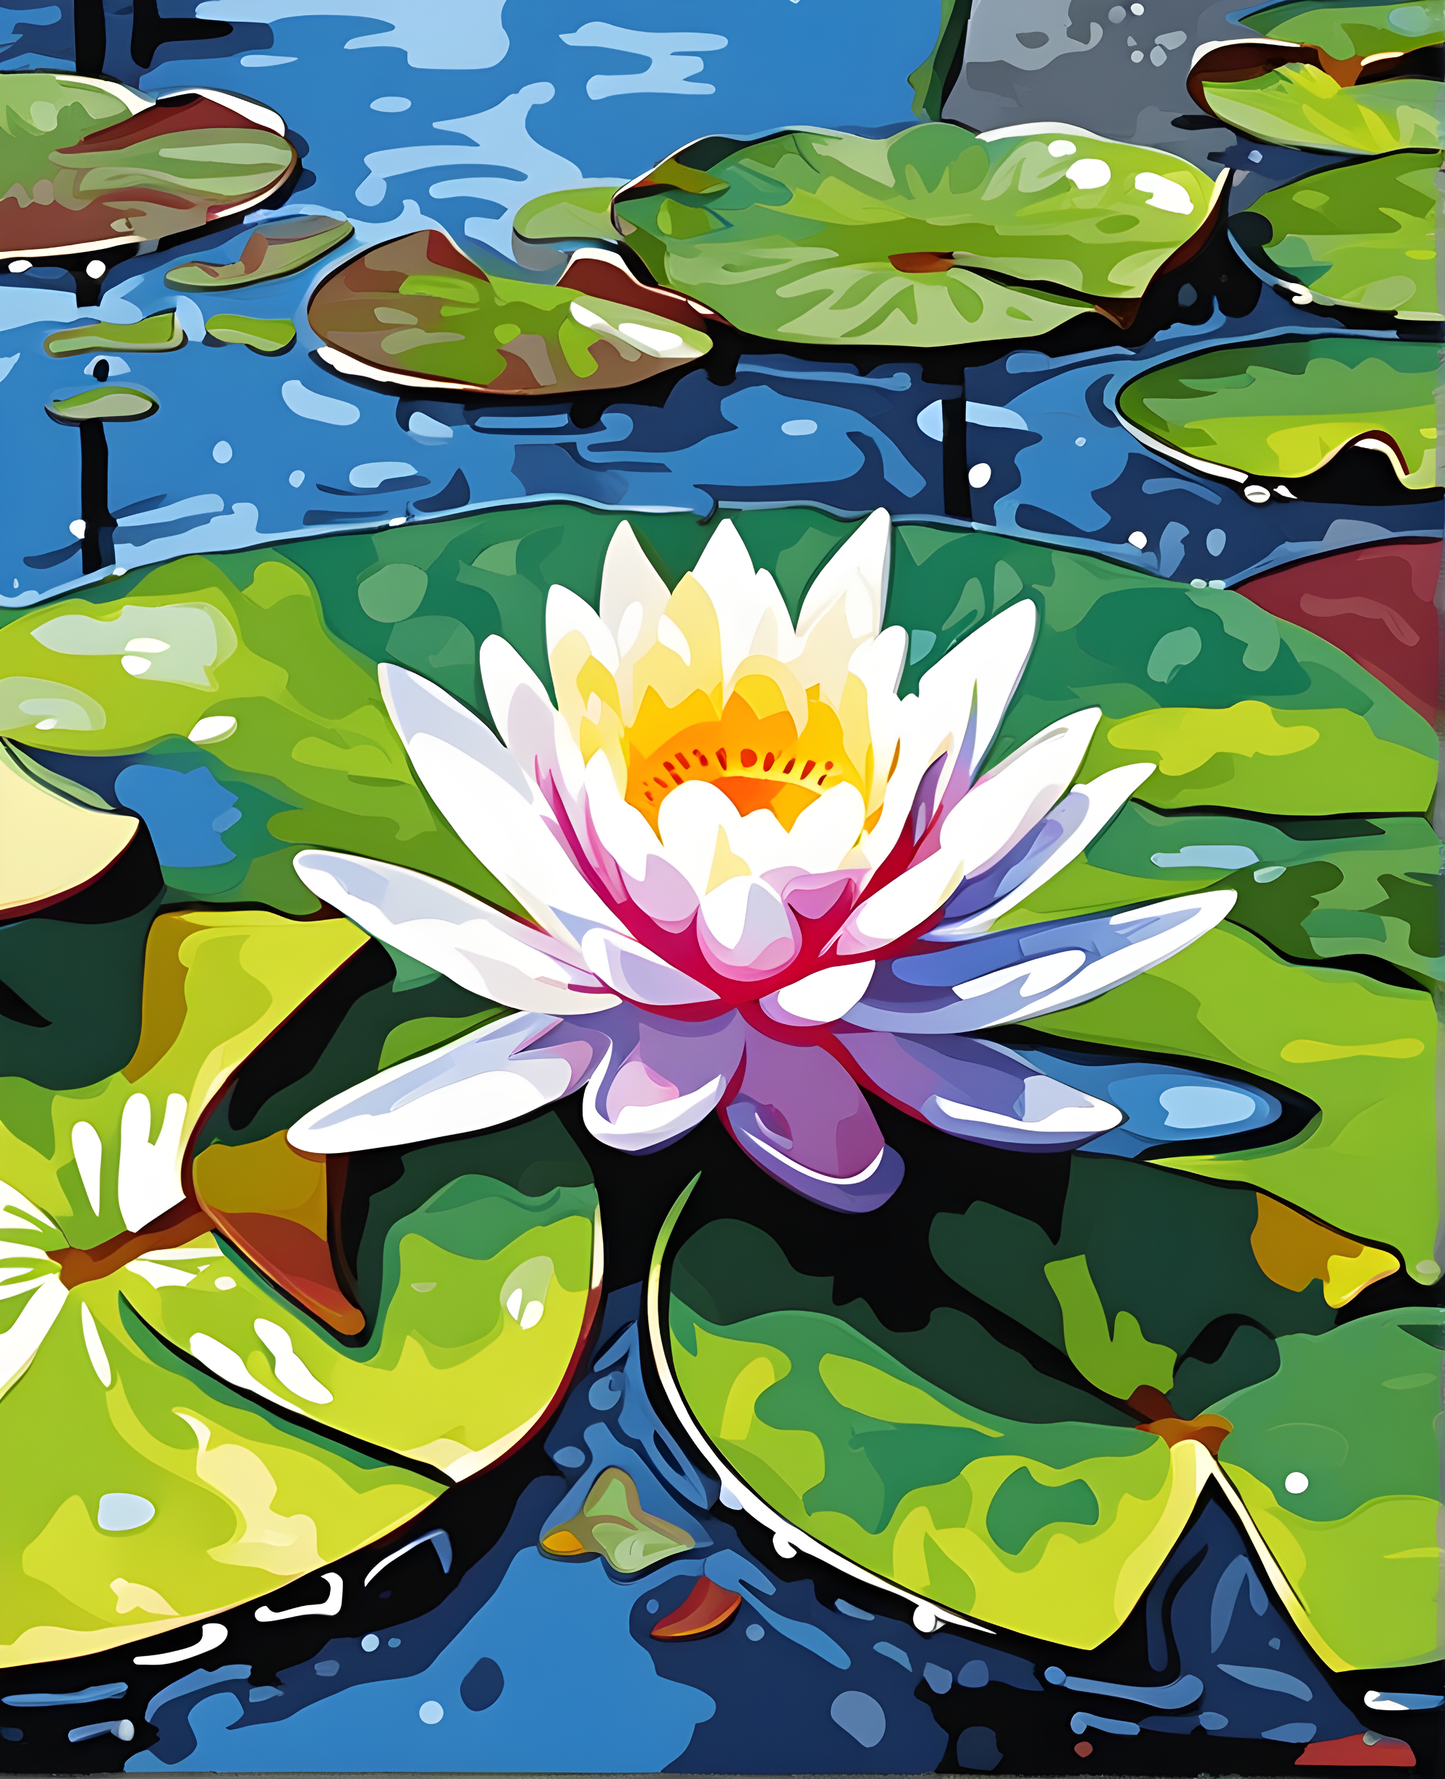 Flowers Collection OD (13) - Water Lily - Van-Go Paint-By-Number Kit